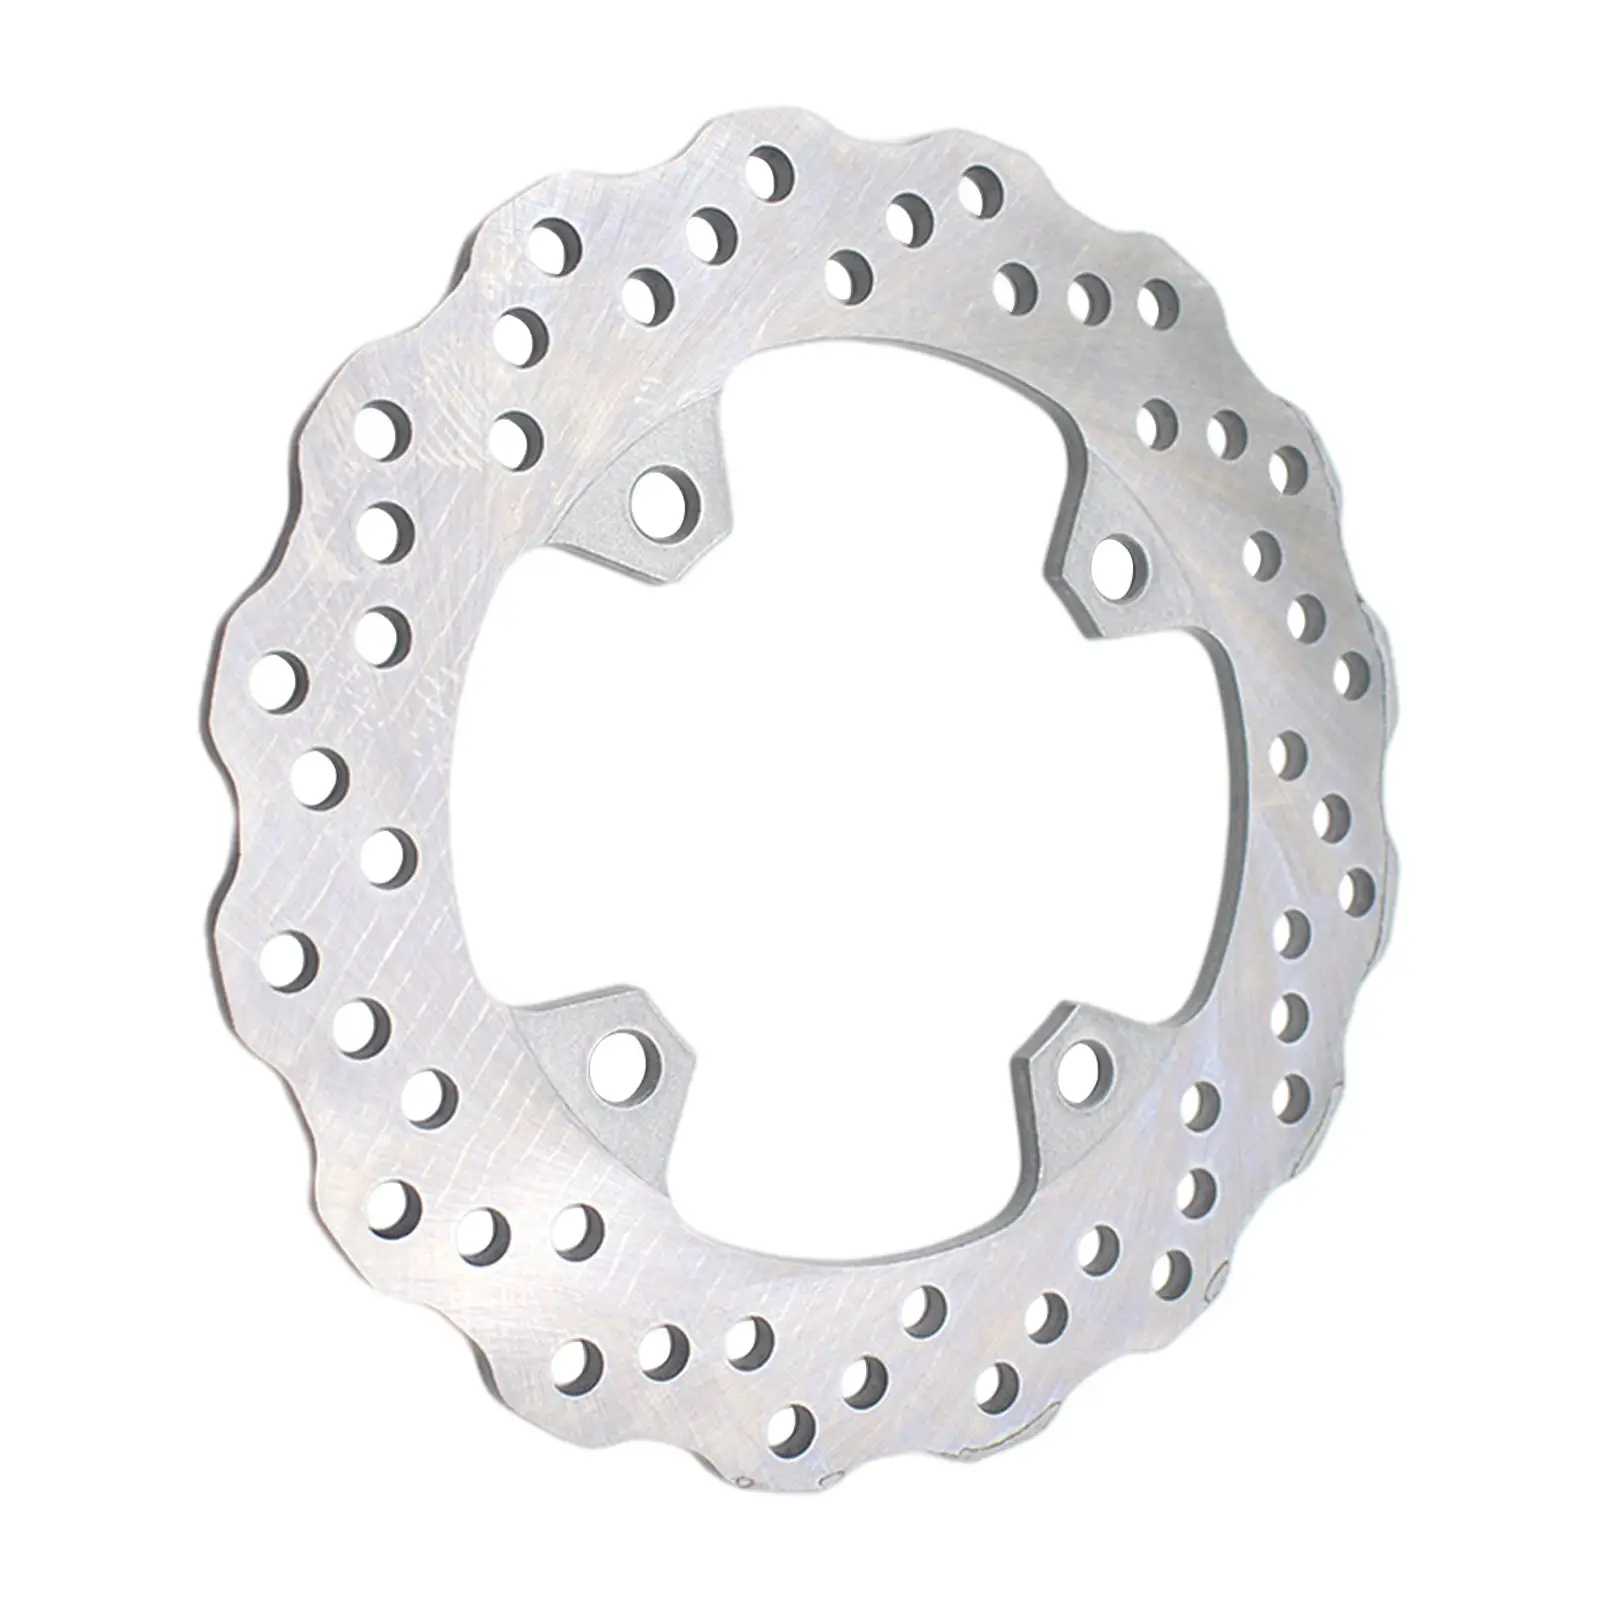 Rear Brake Disc Rotor, Motorcycle Replacement, Accessories 220mm Silver Steel for Kawasaki Z1000 ER-6F ZX-10R ZX10 650 Cc ZX-6R